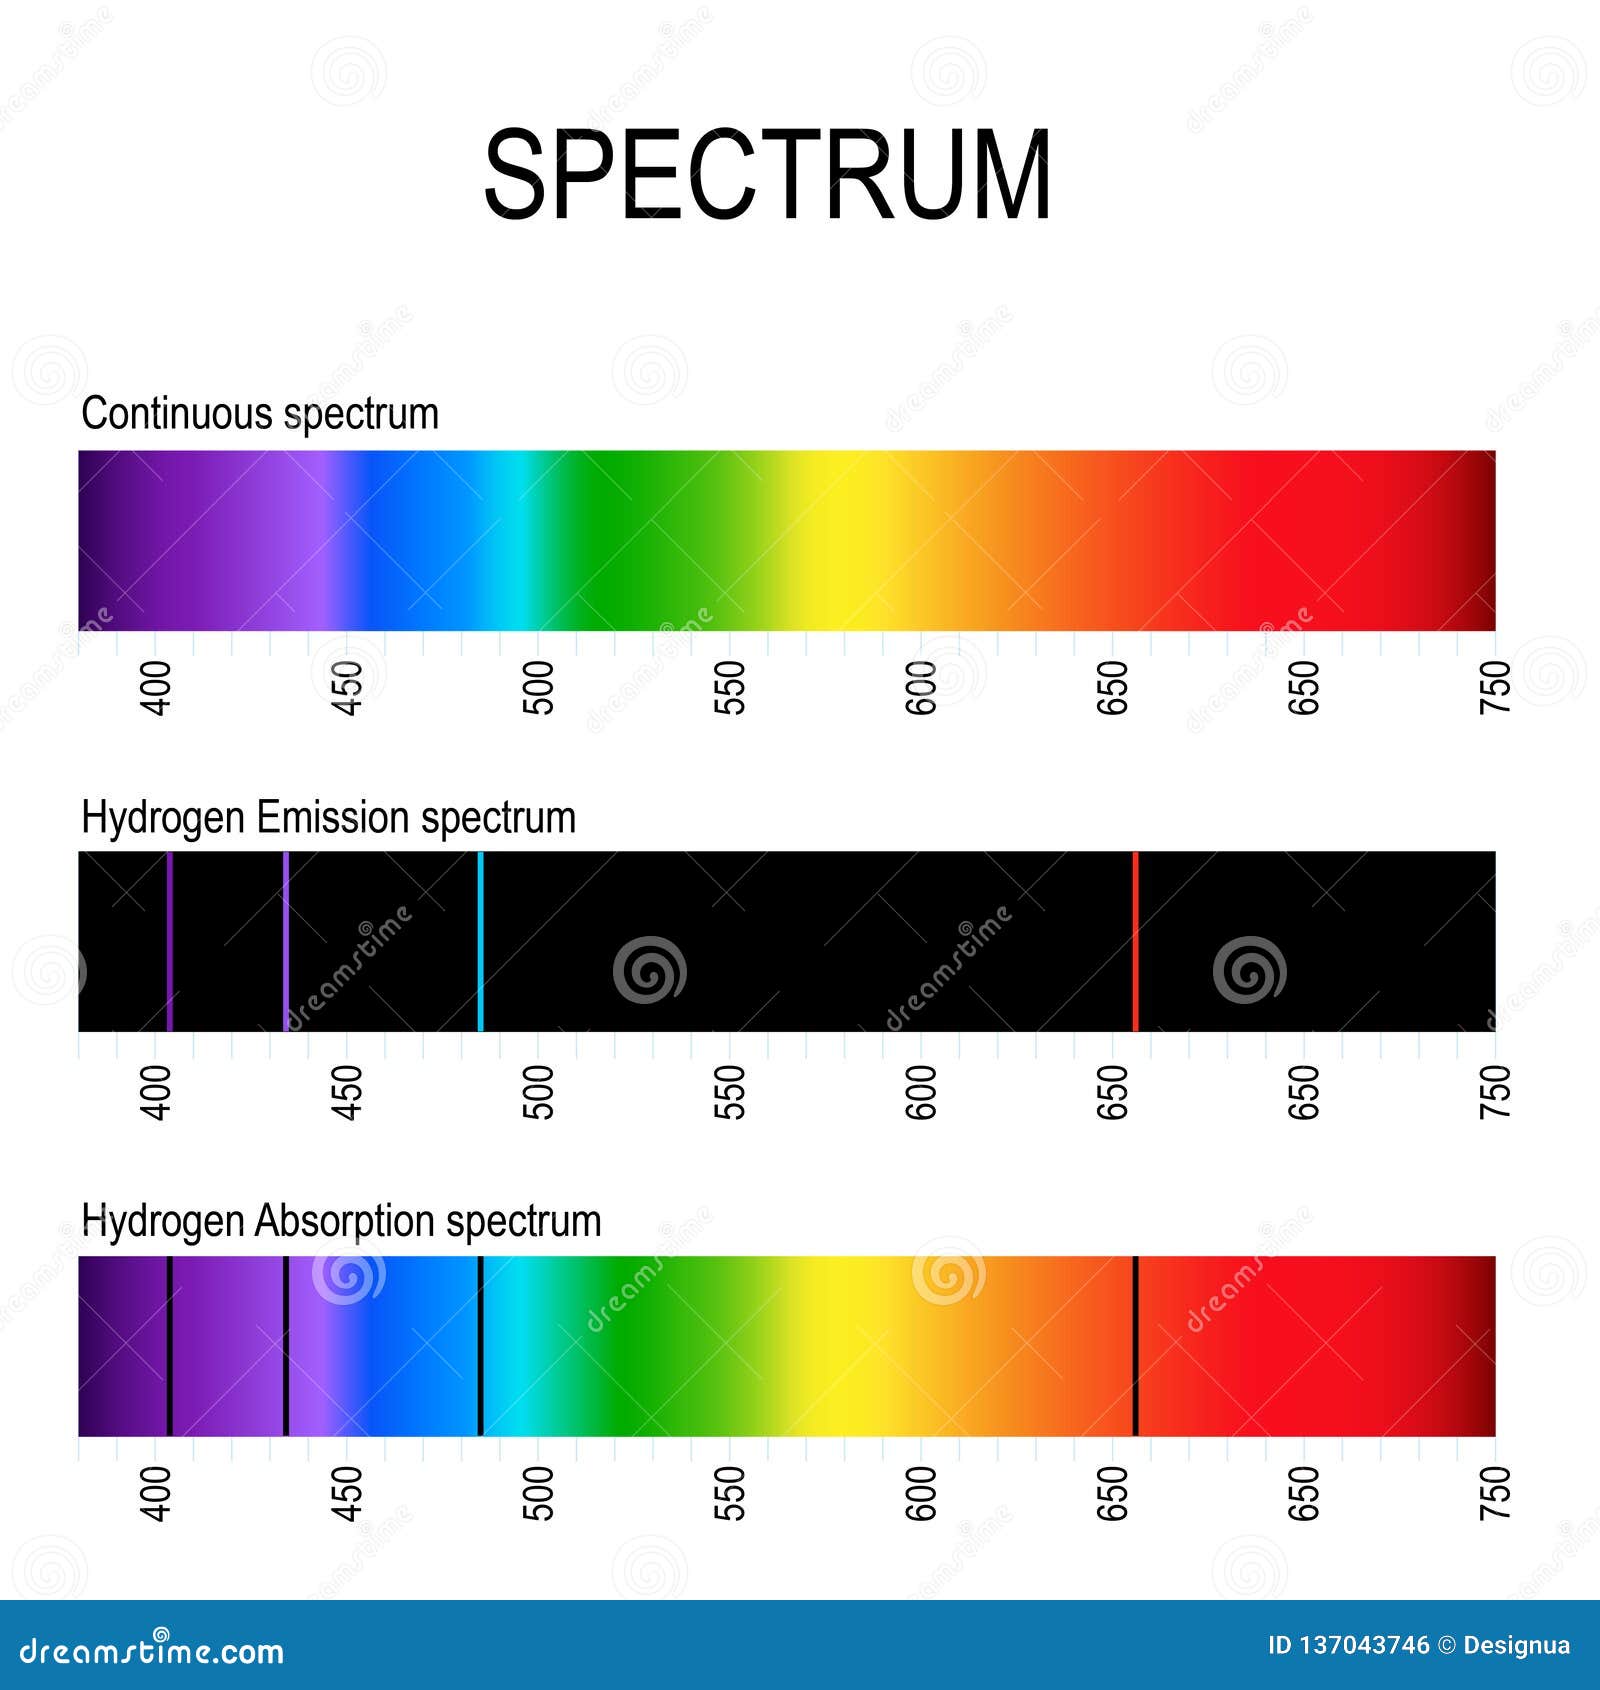 spectrum. spectral line for example hydrogen. emission lines and absorption lines